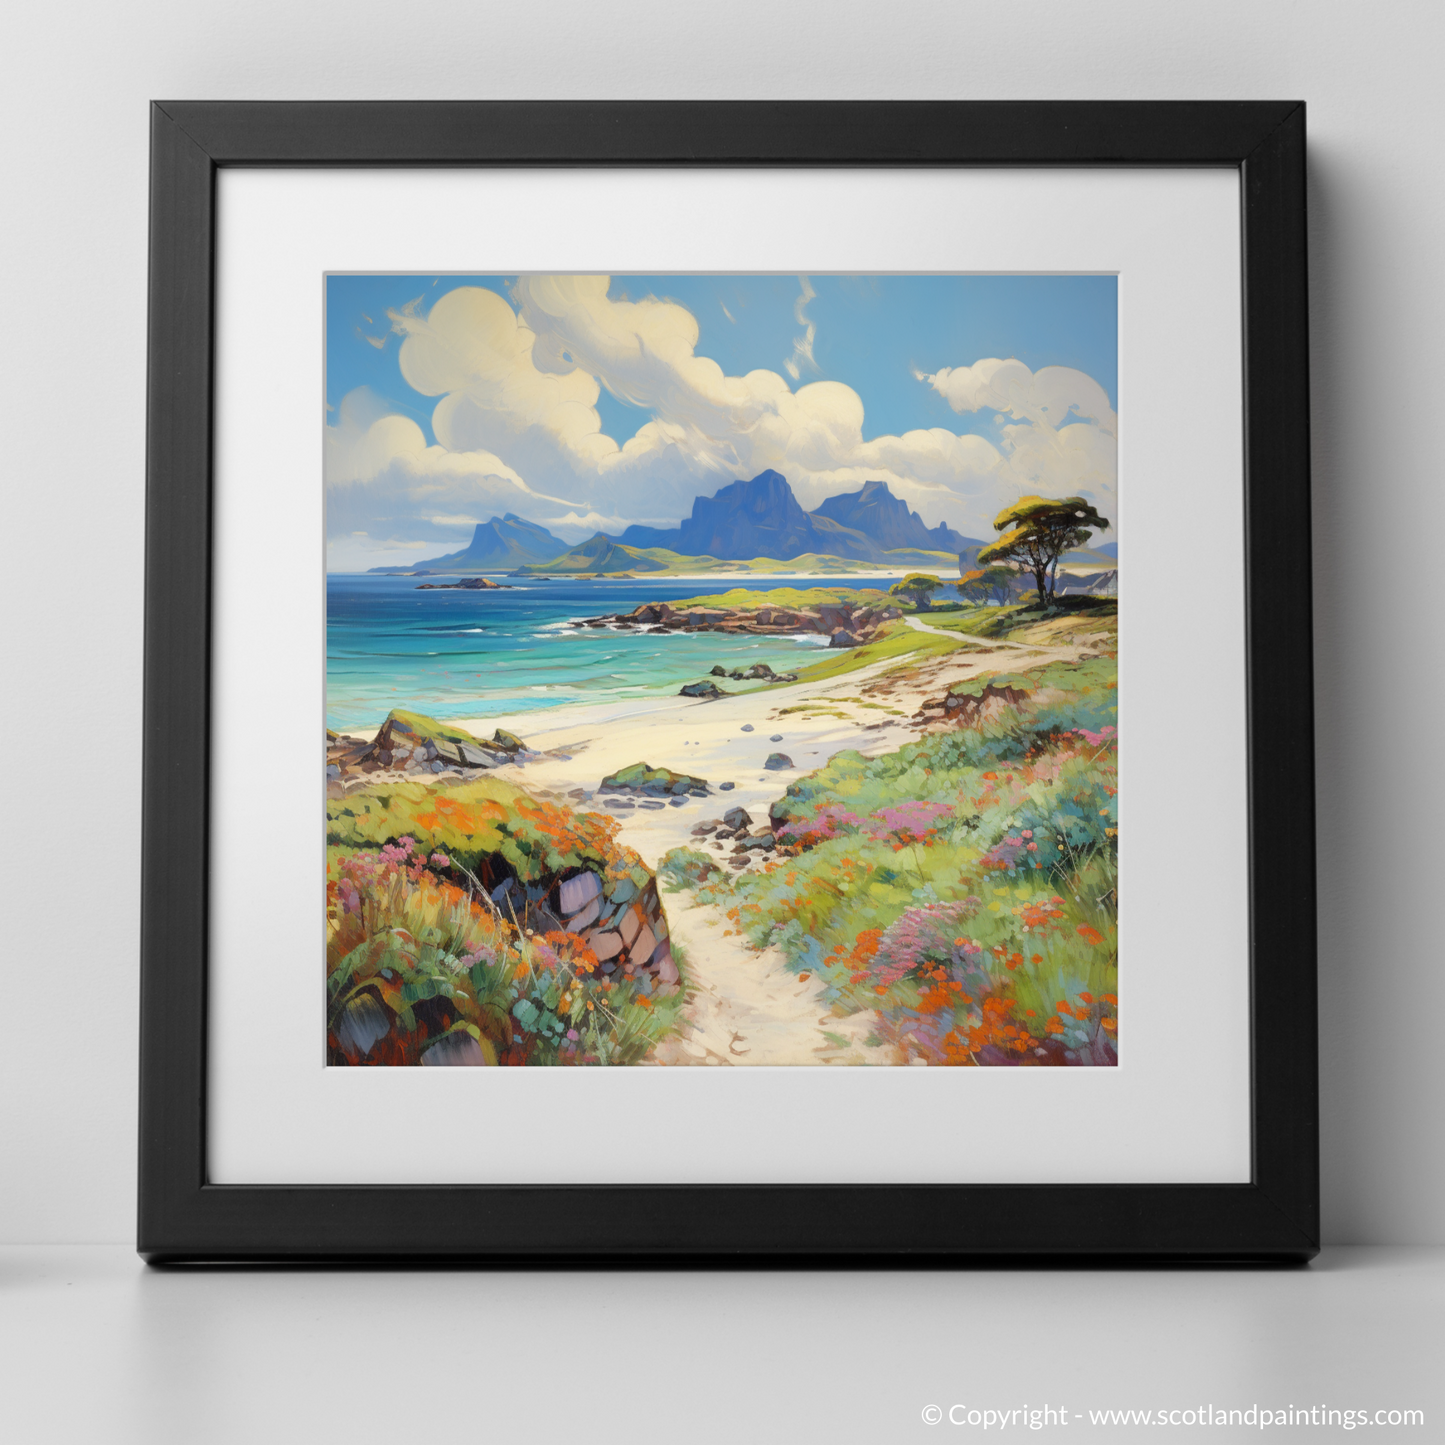 Art Print of Isle of Eigg, Inner Hebrides in summer with a black frame